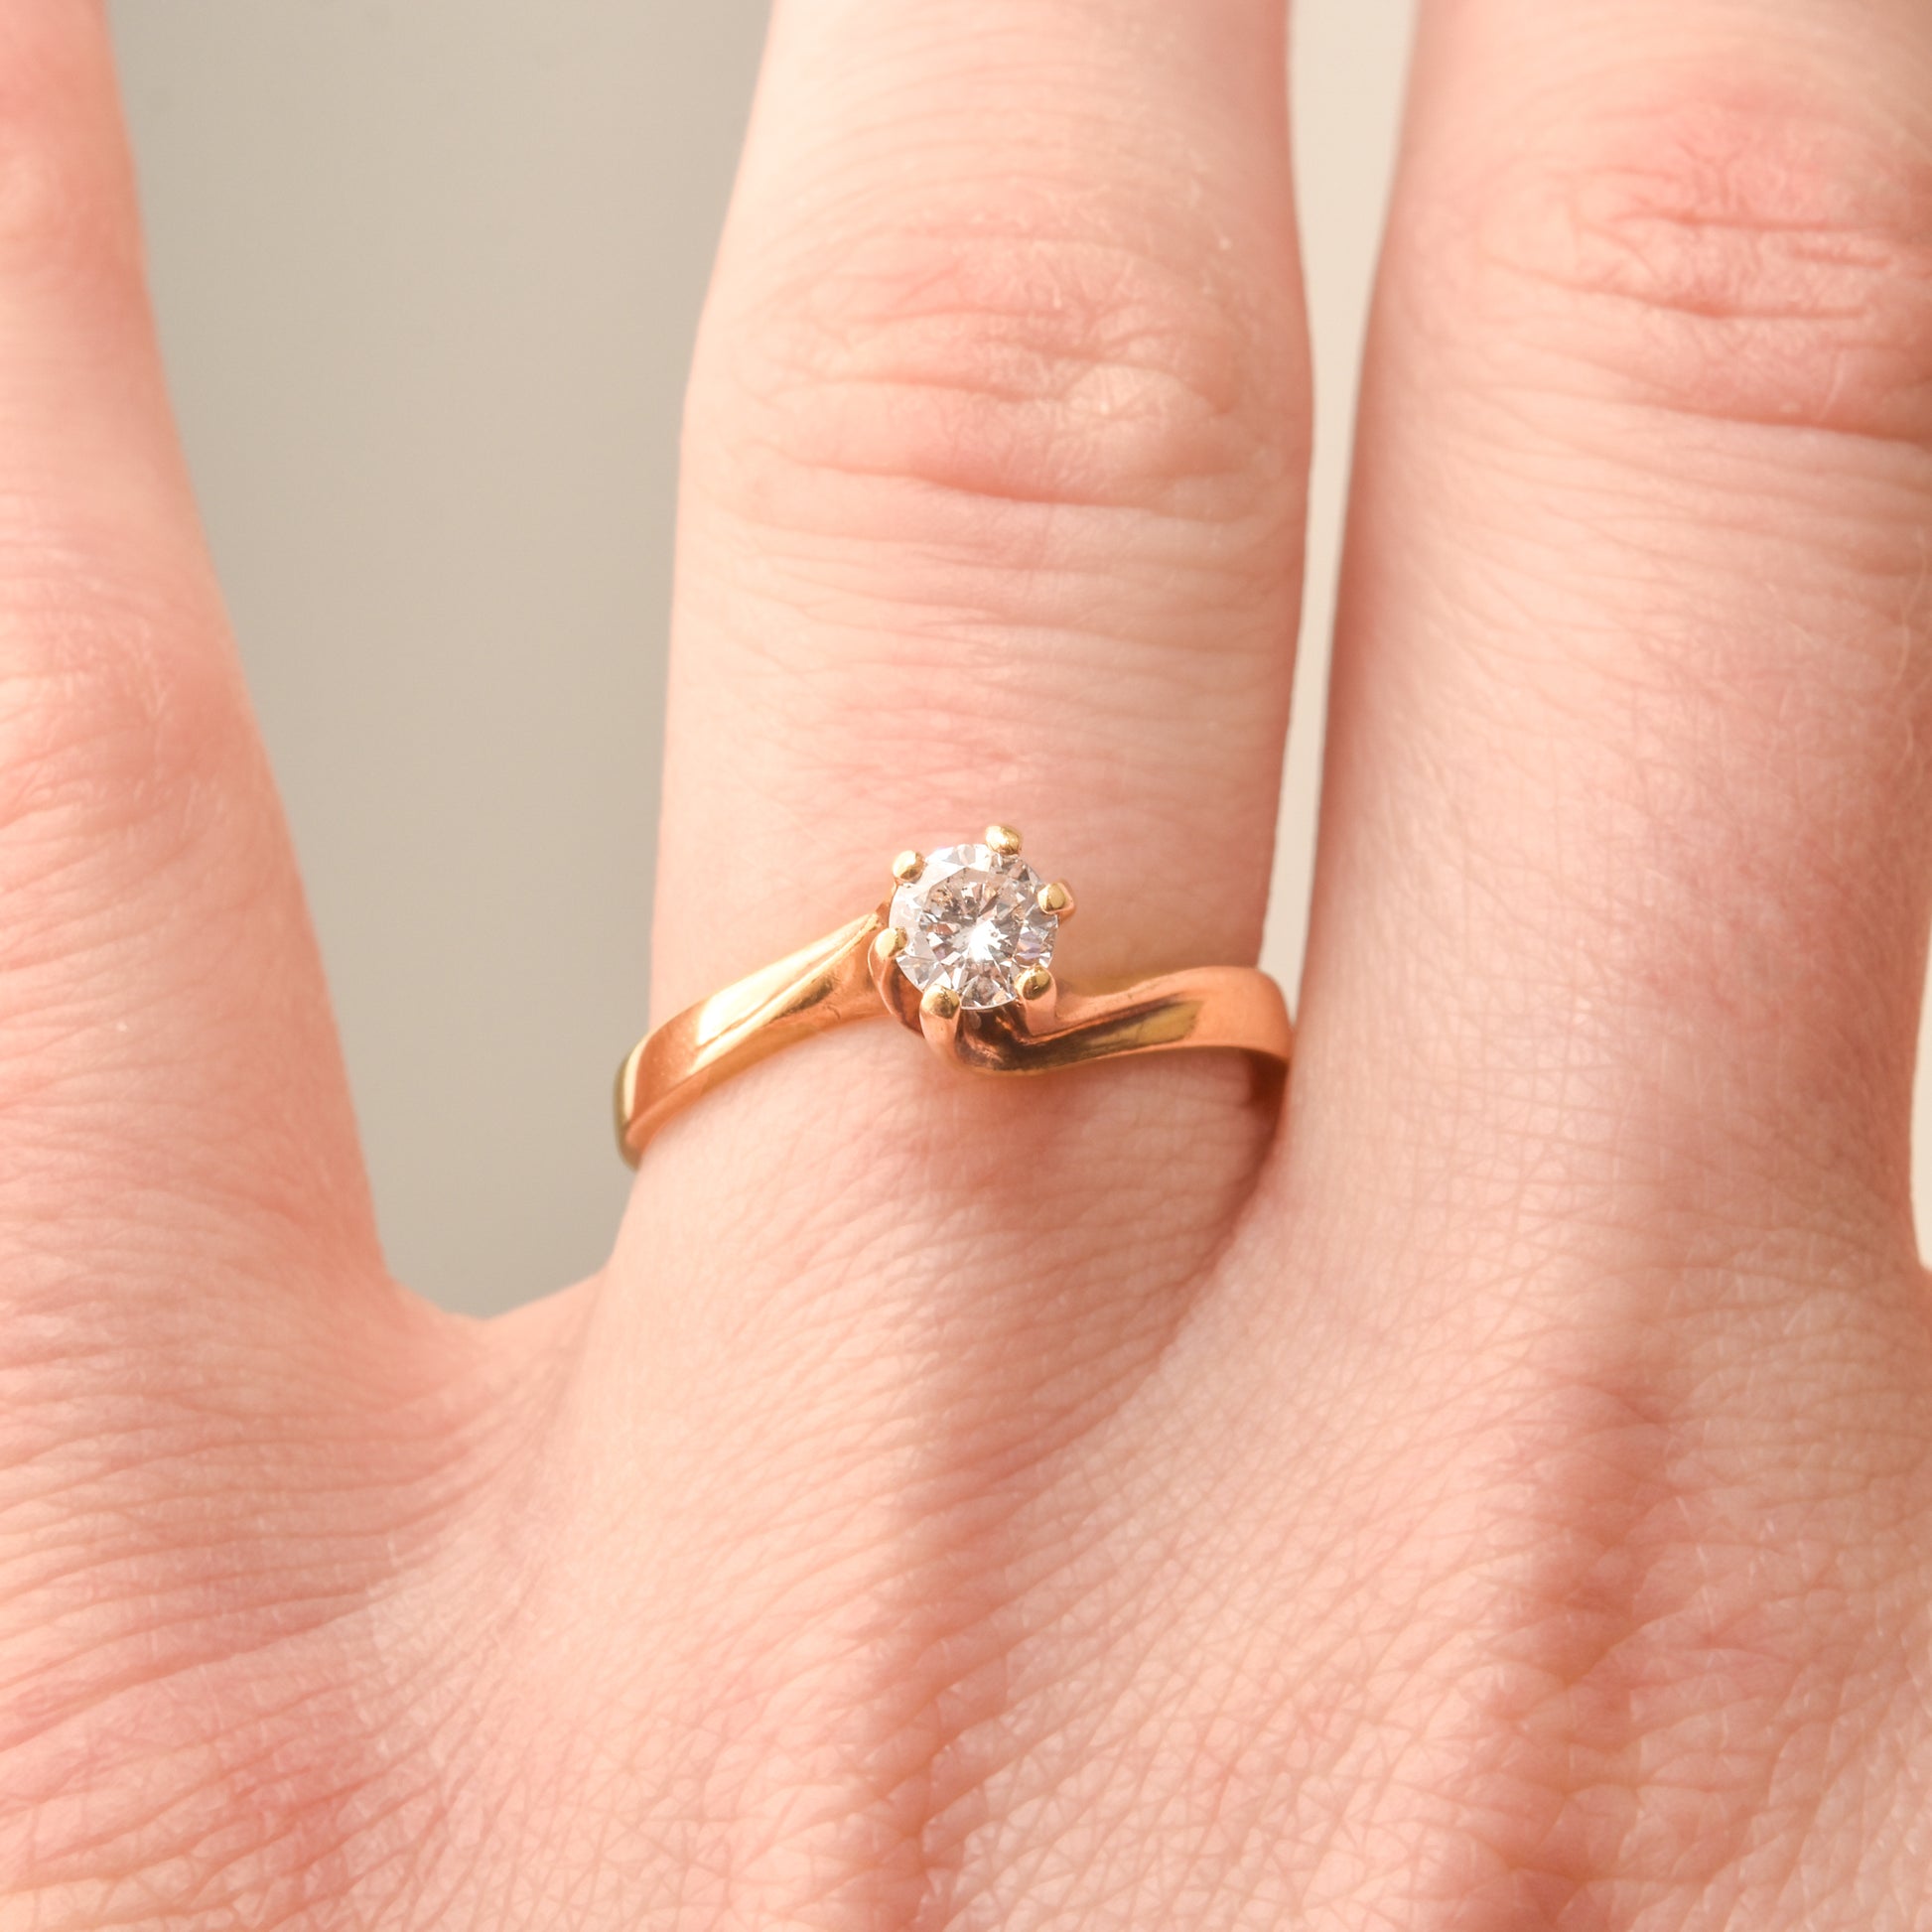 18K yellow gold diamond solitaire engagement ring with 6-prong spiral setting, size 7.5 US, showcased on a finger.